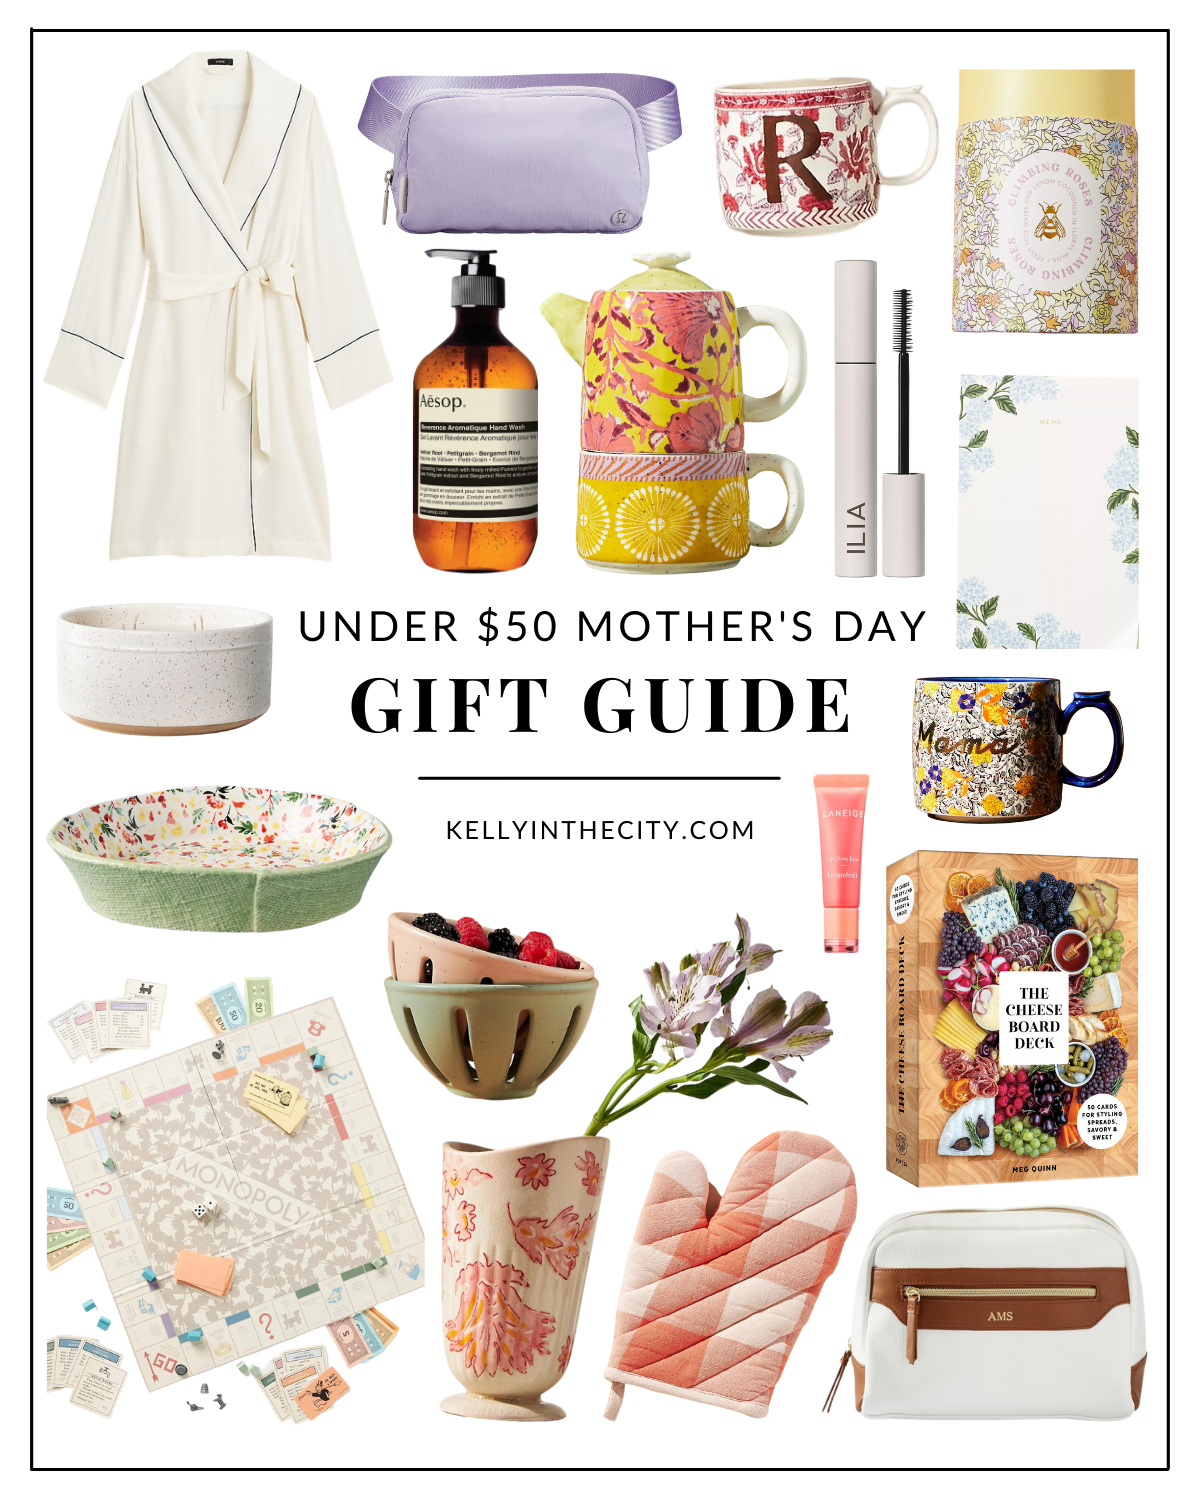 Mother's Day Gifts Under $50 - Kelly in the City